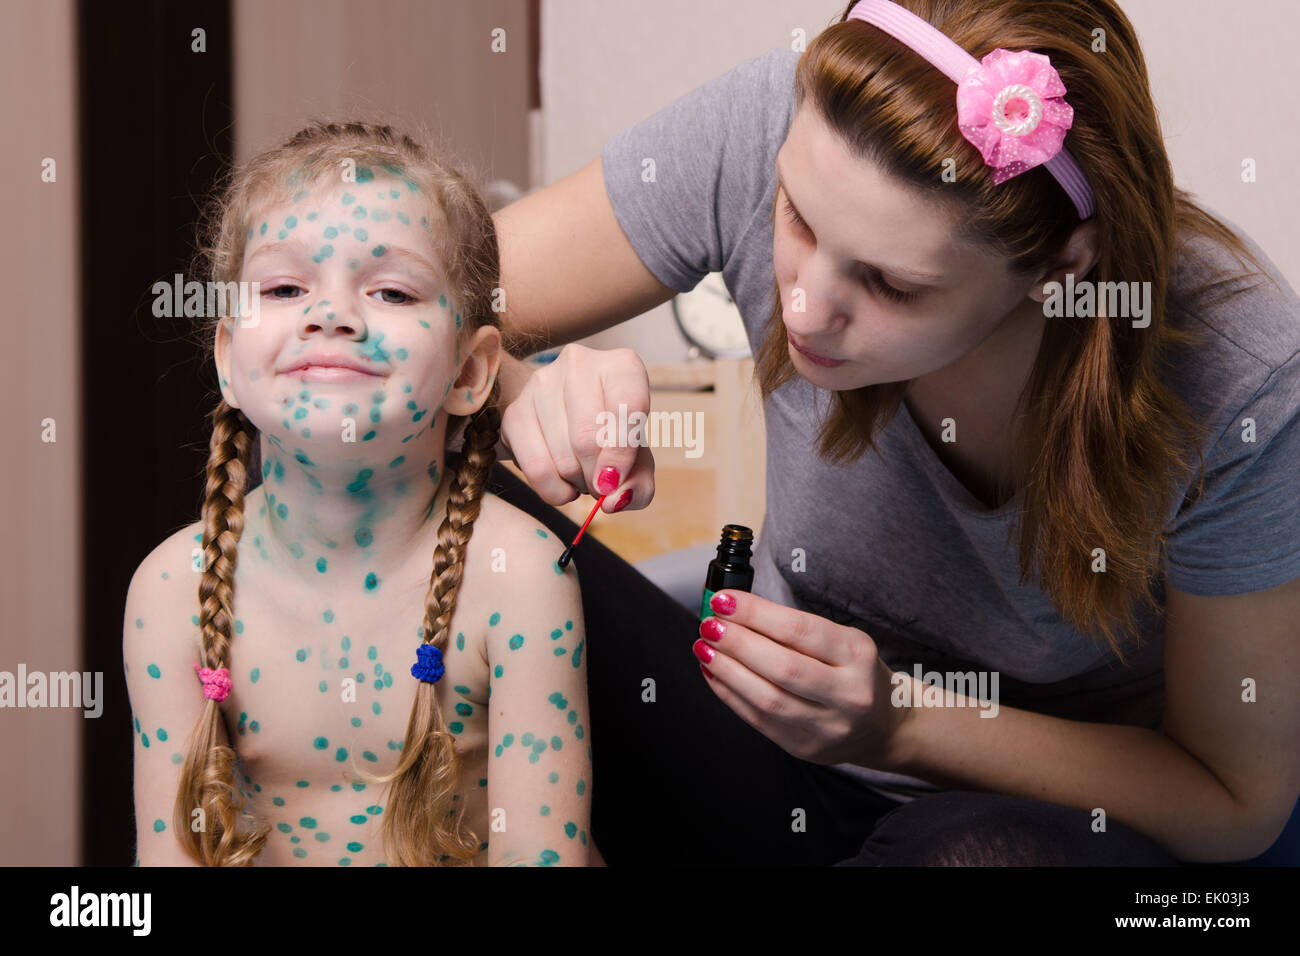 Mom misses zelenkoj sores on the body of a child suffering from chickenpox Stock Photo